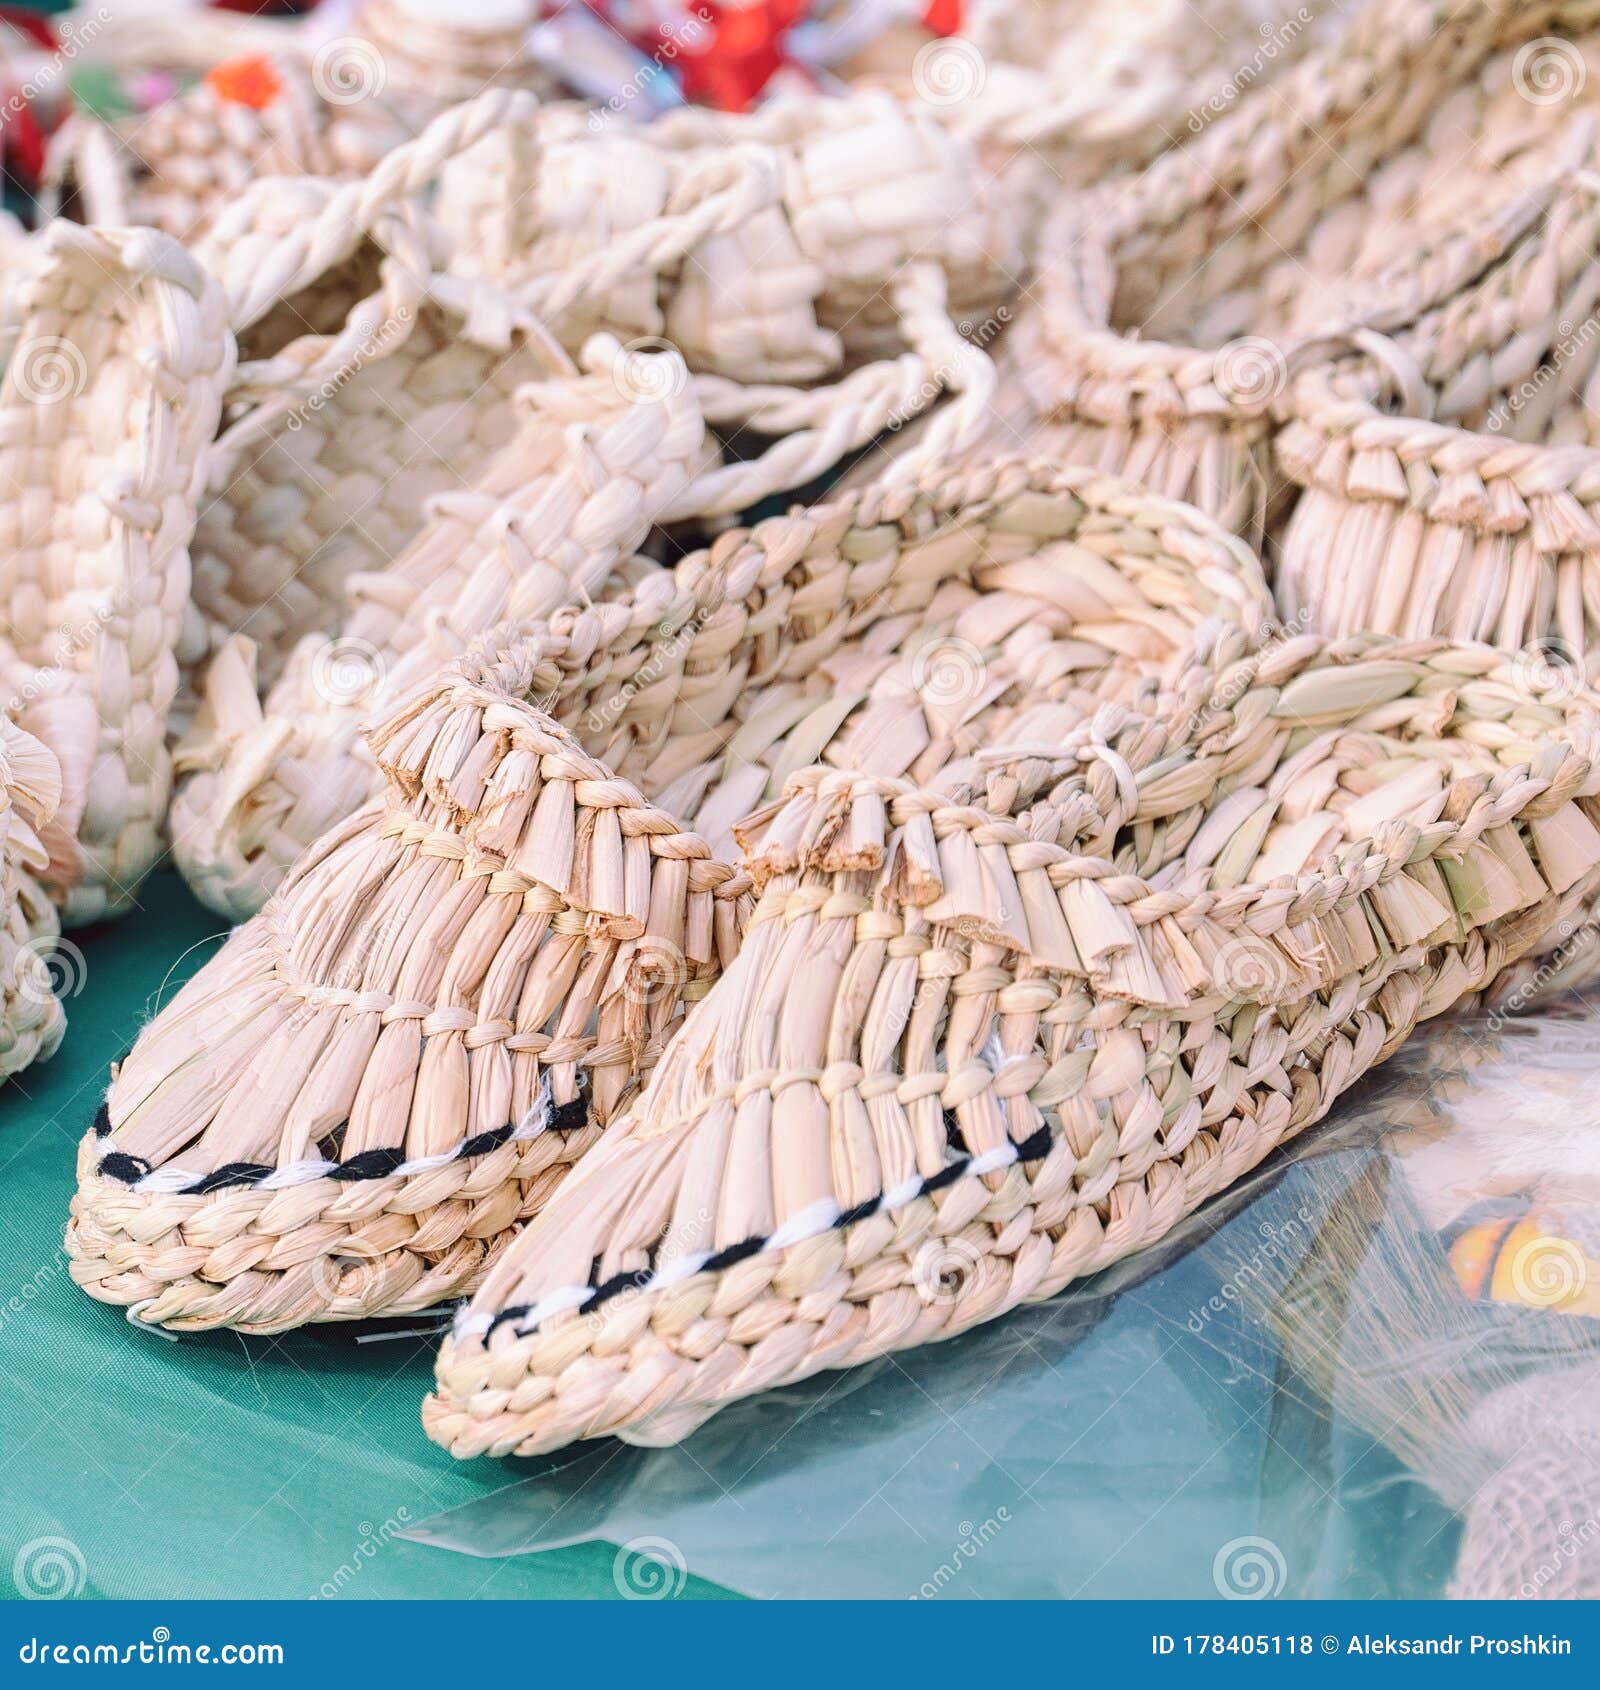 shoes souvenirs made of birch bark souvenir from Russia woven bast shoes Lapti 